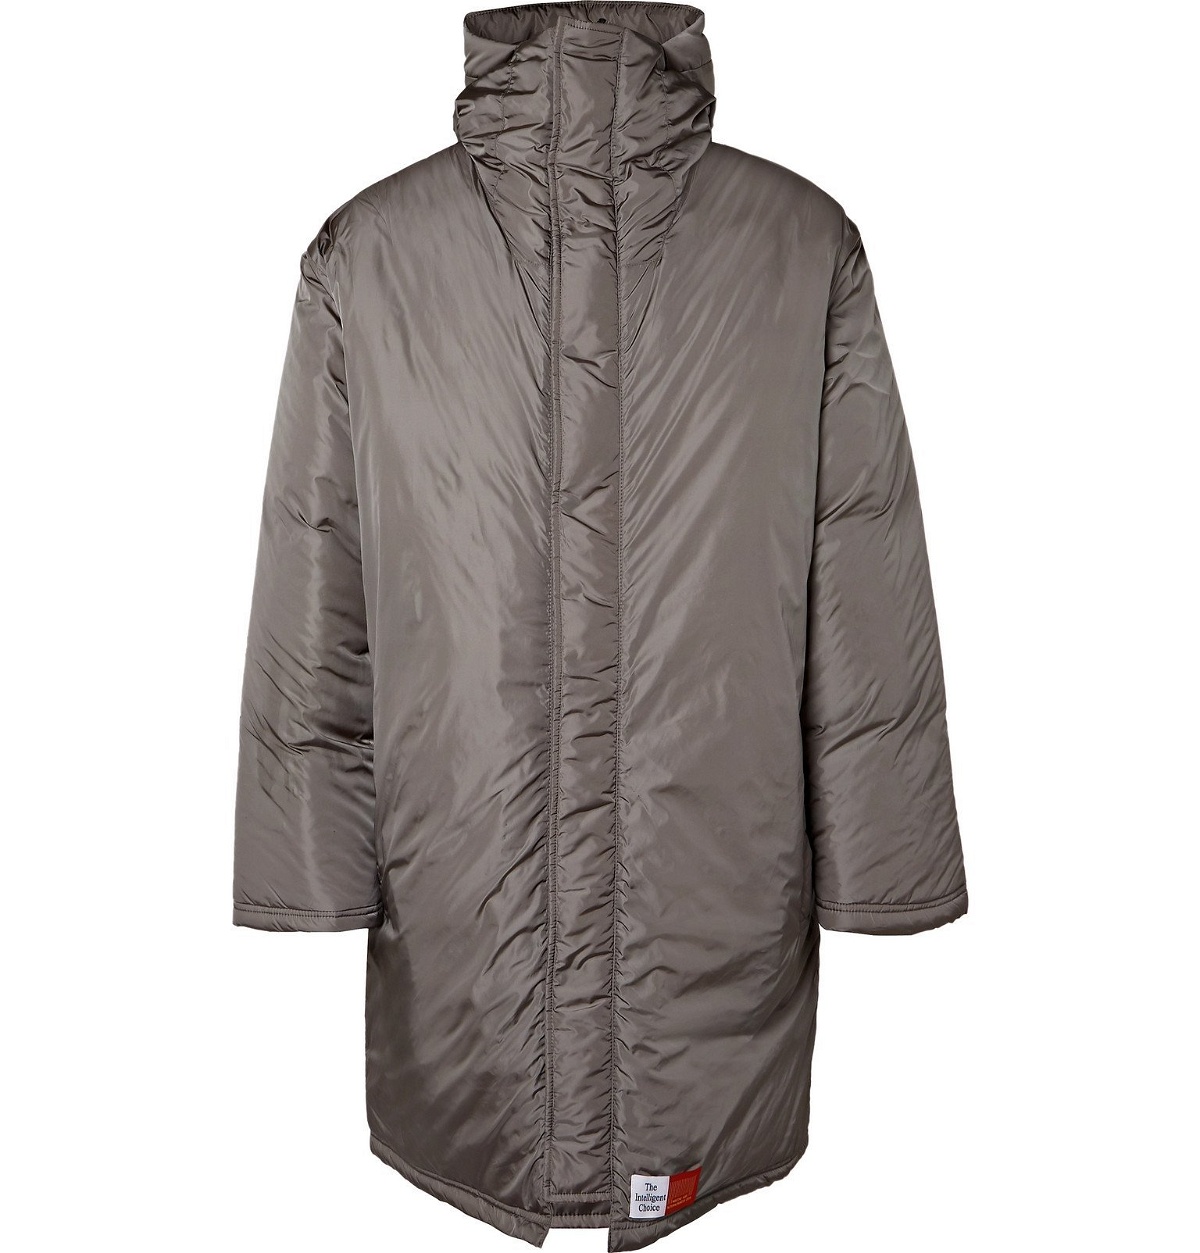 Martine Rose - The Wenger Oversized Printed Shell Hooded Parka - Gray ...